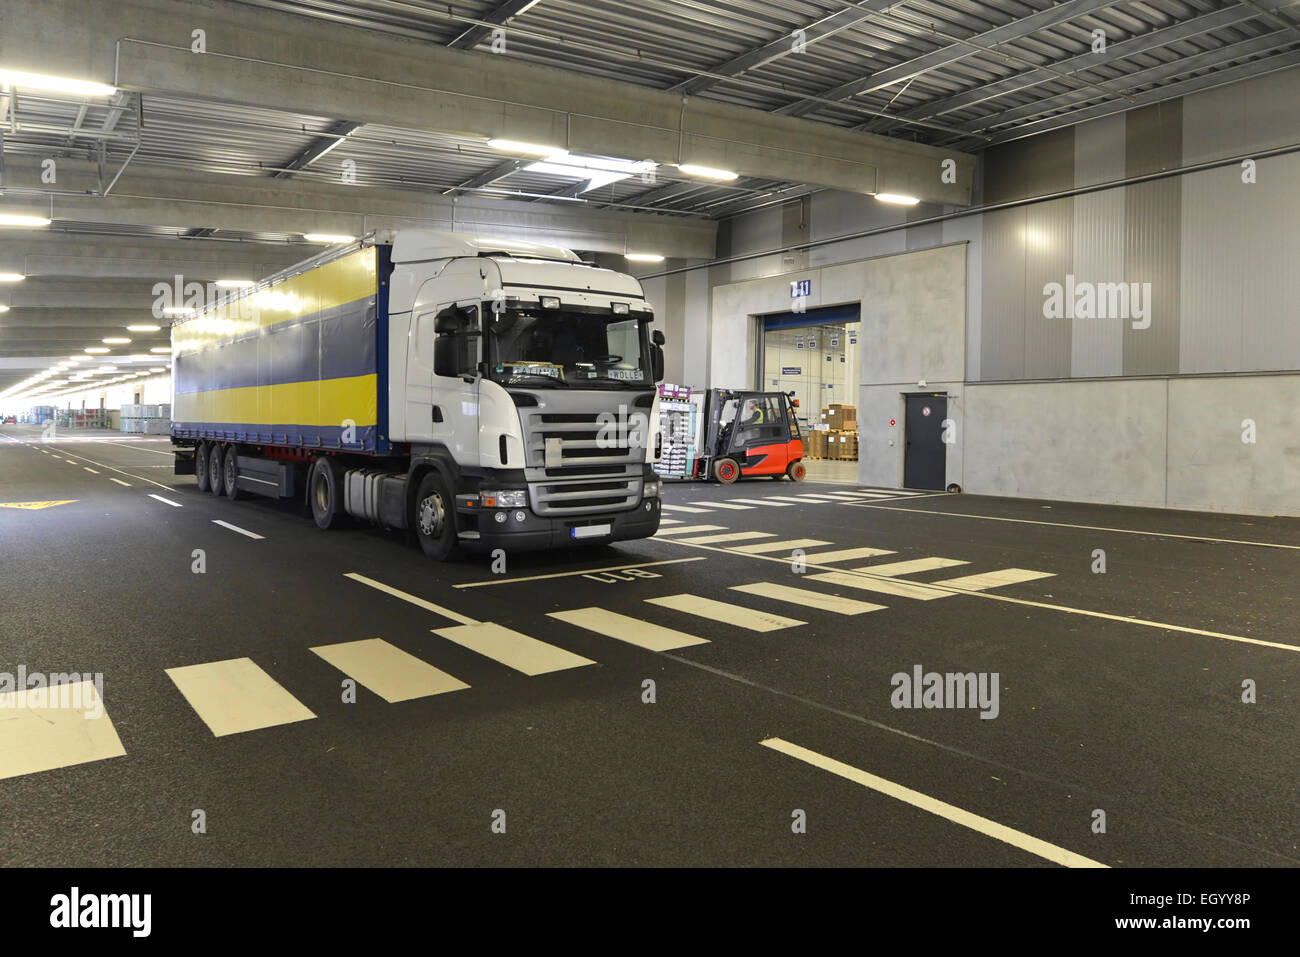 Truck in a parking garage Stock Photo - Alamy